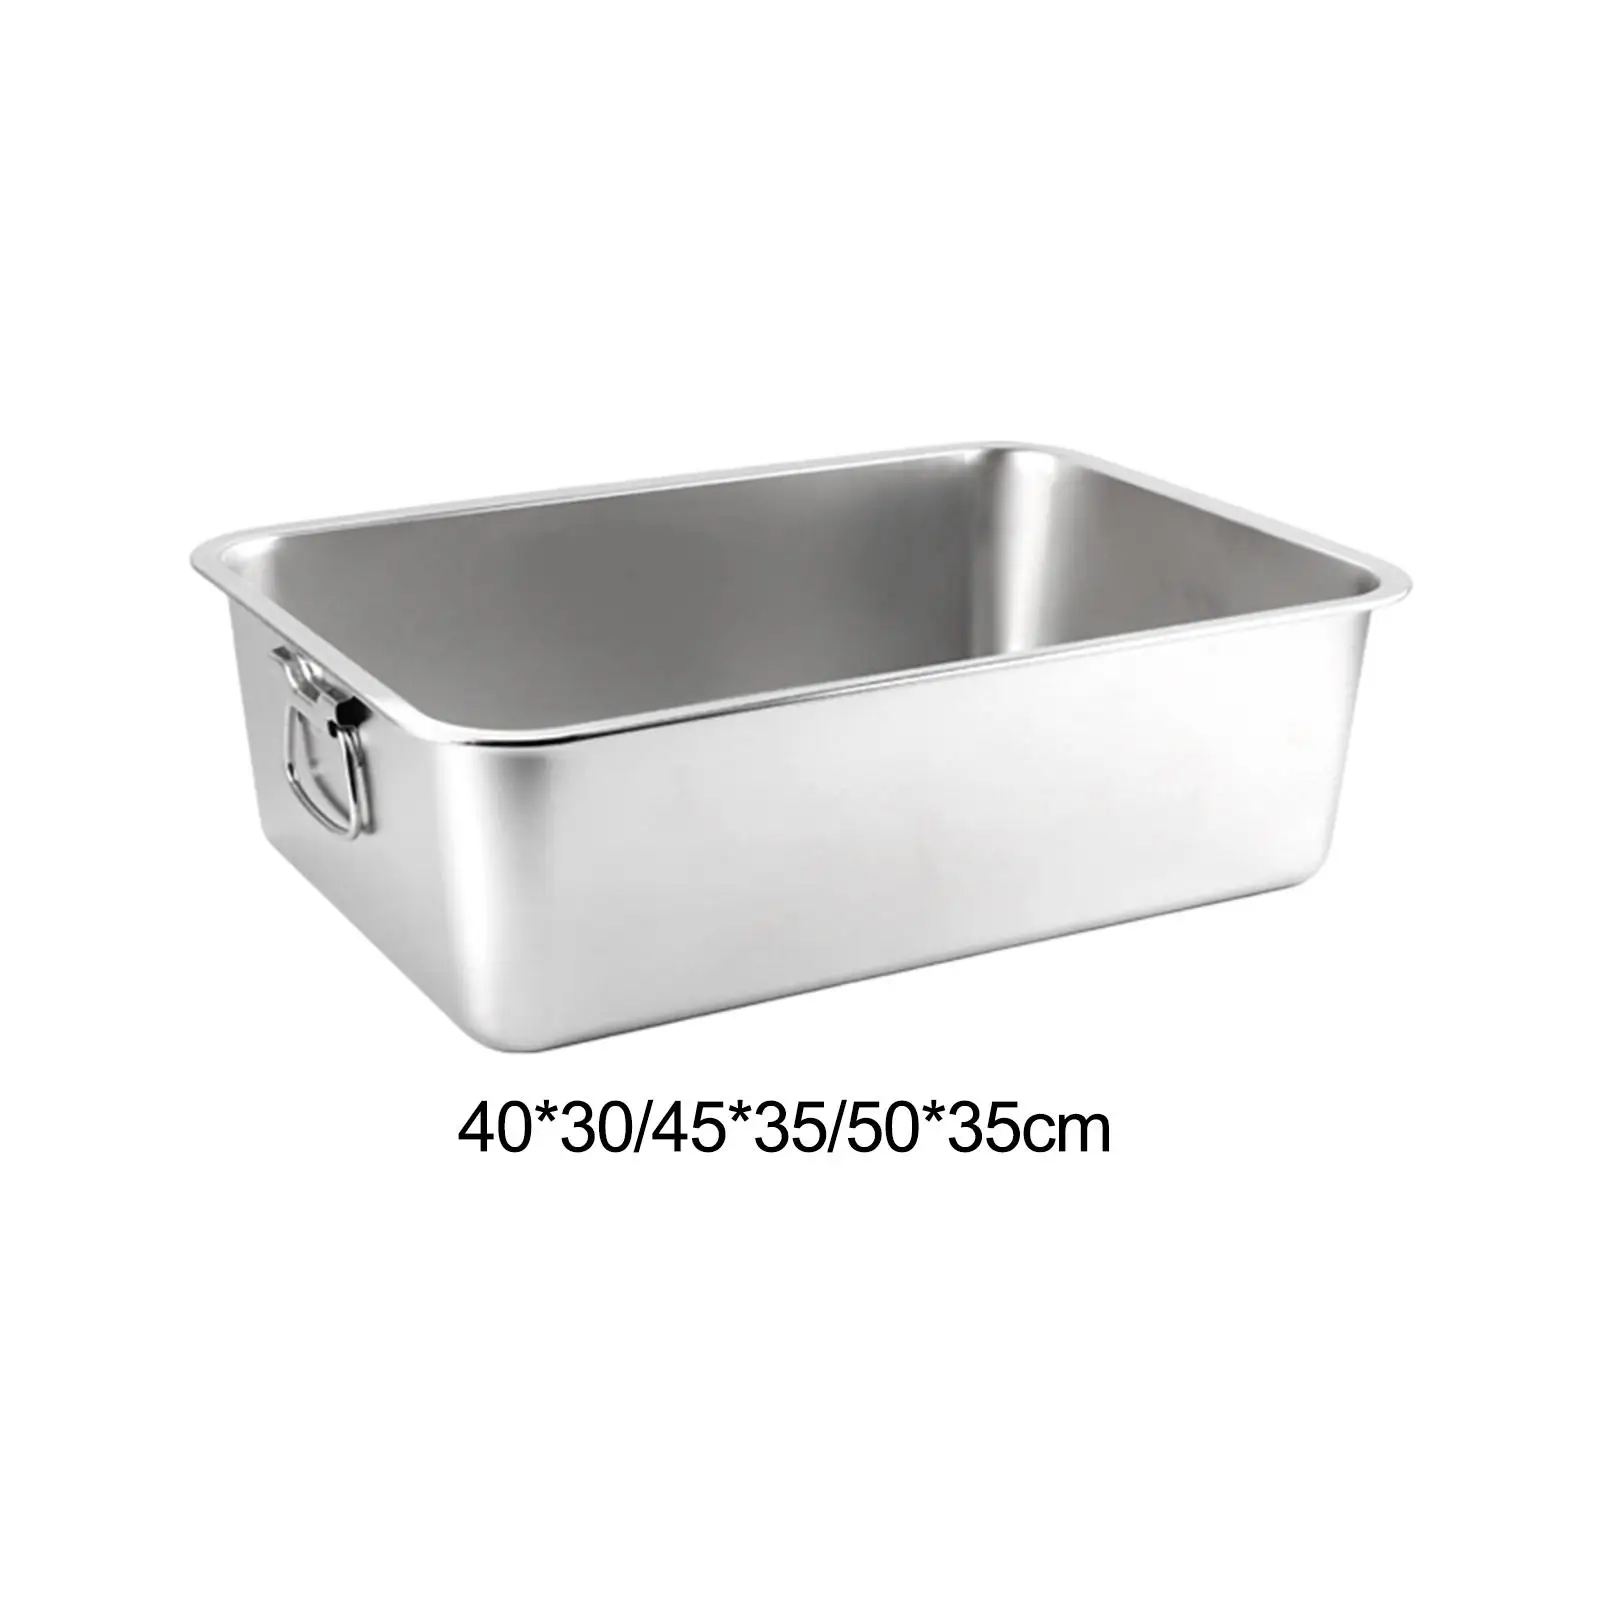 Open Litter Box Indoor Cats Stainless Steel Toilet Cat Sand Basin Kitty Litter Pan for Small Medium Large Cats